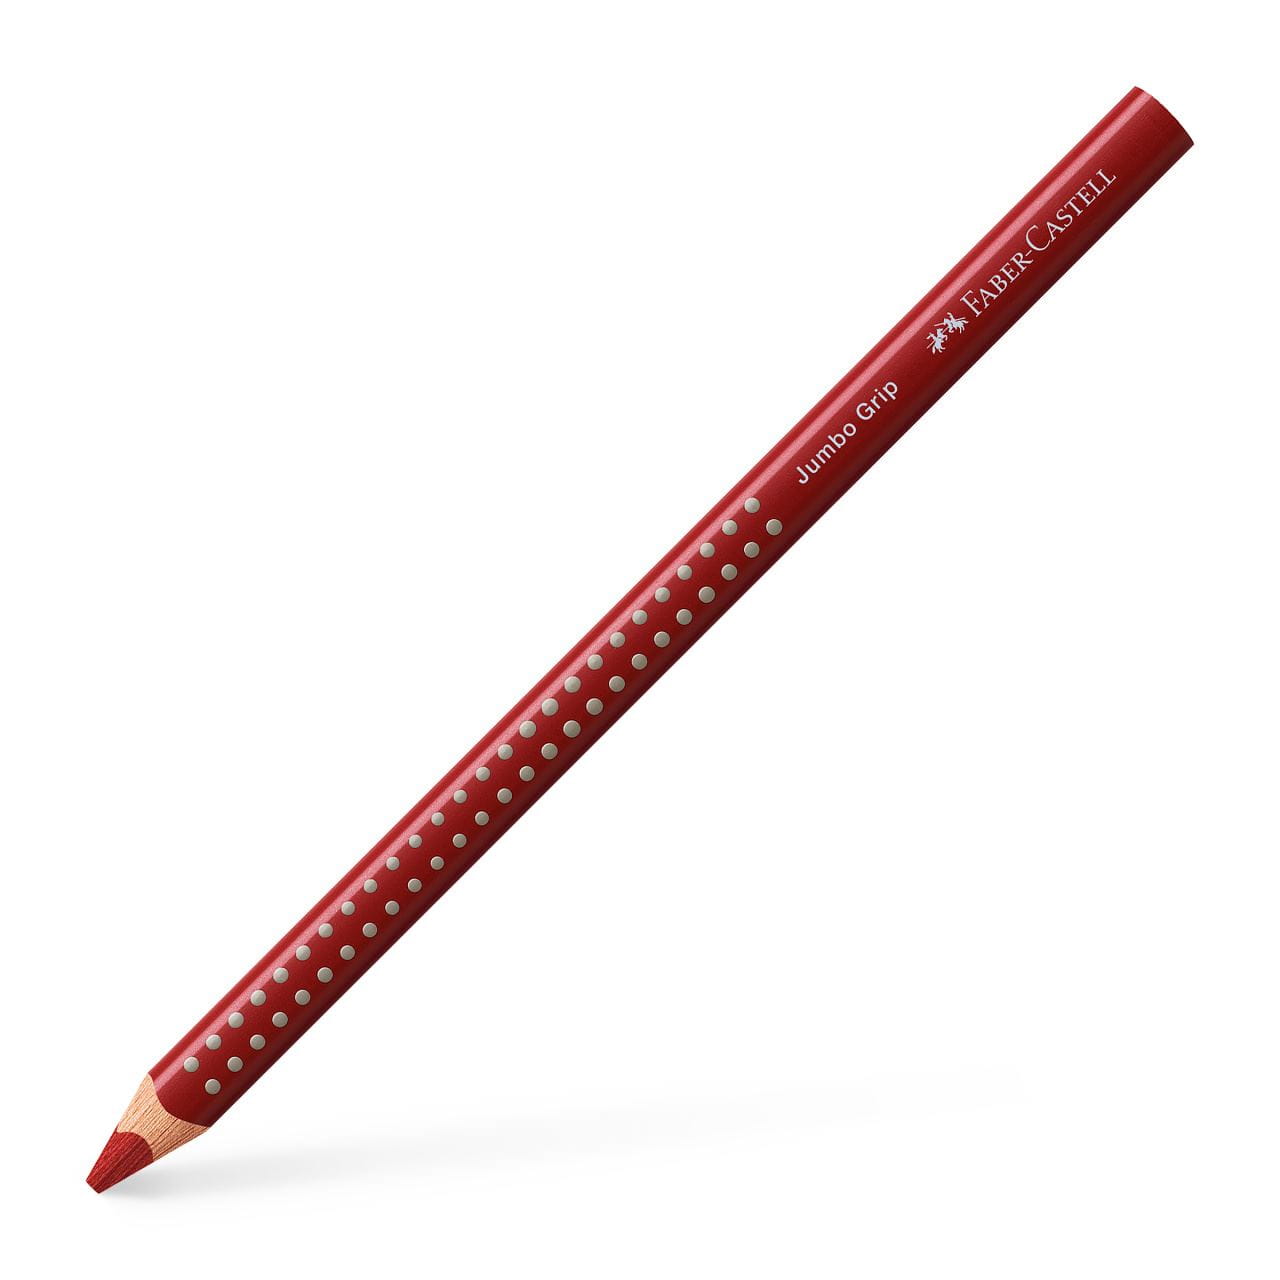 Faber-Castell - Jumbo Grip colour pencil, Indian red